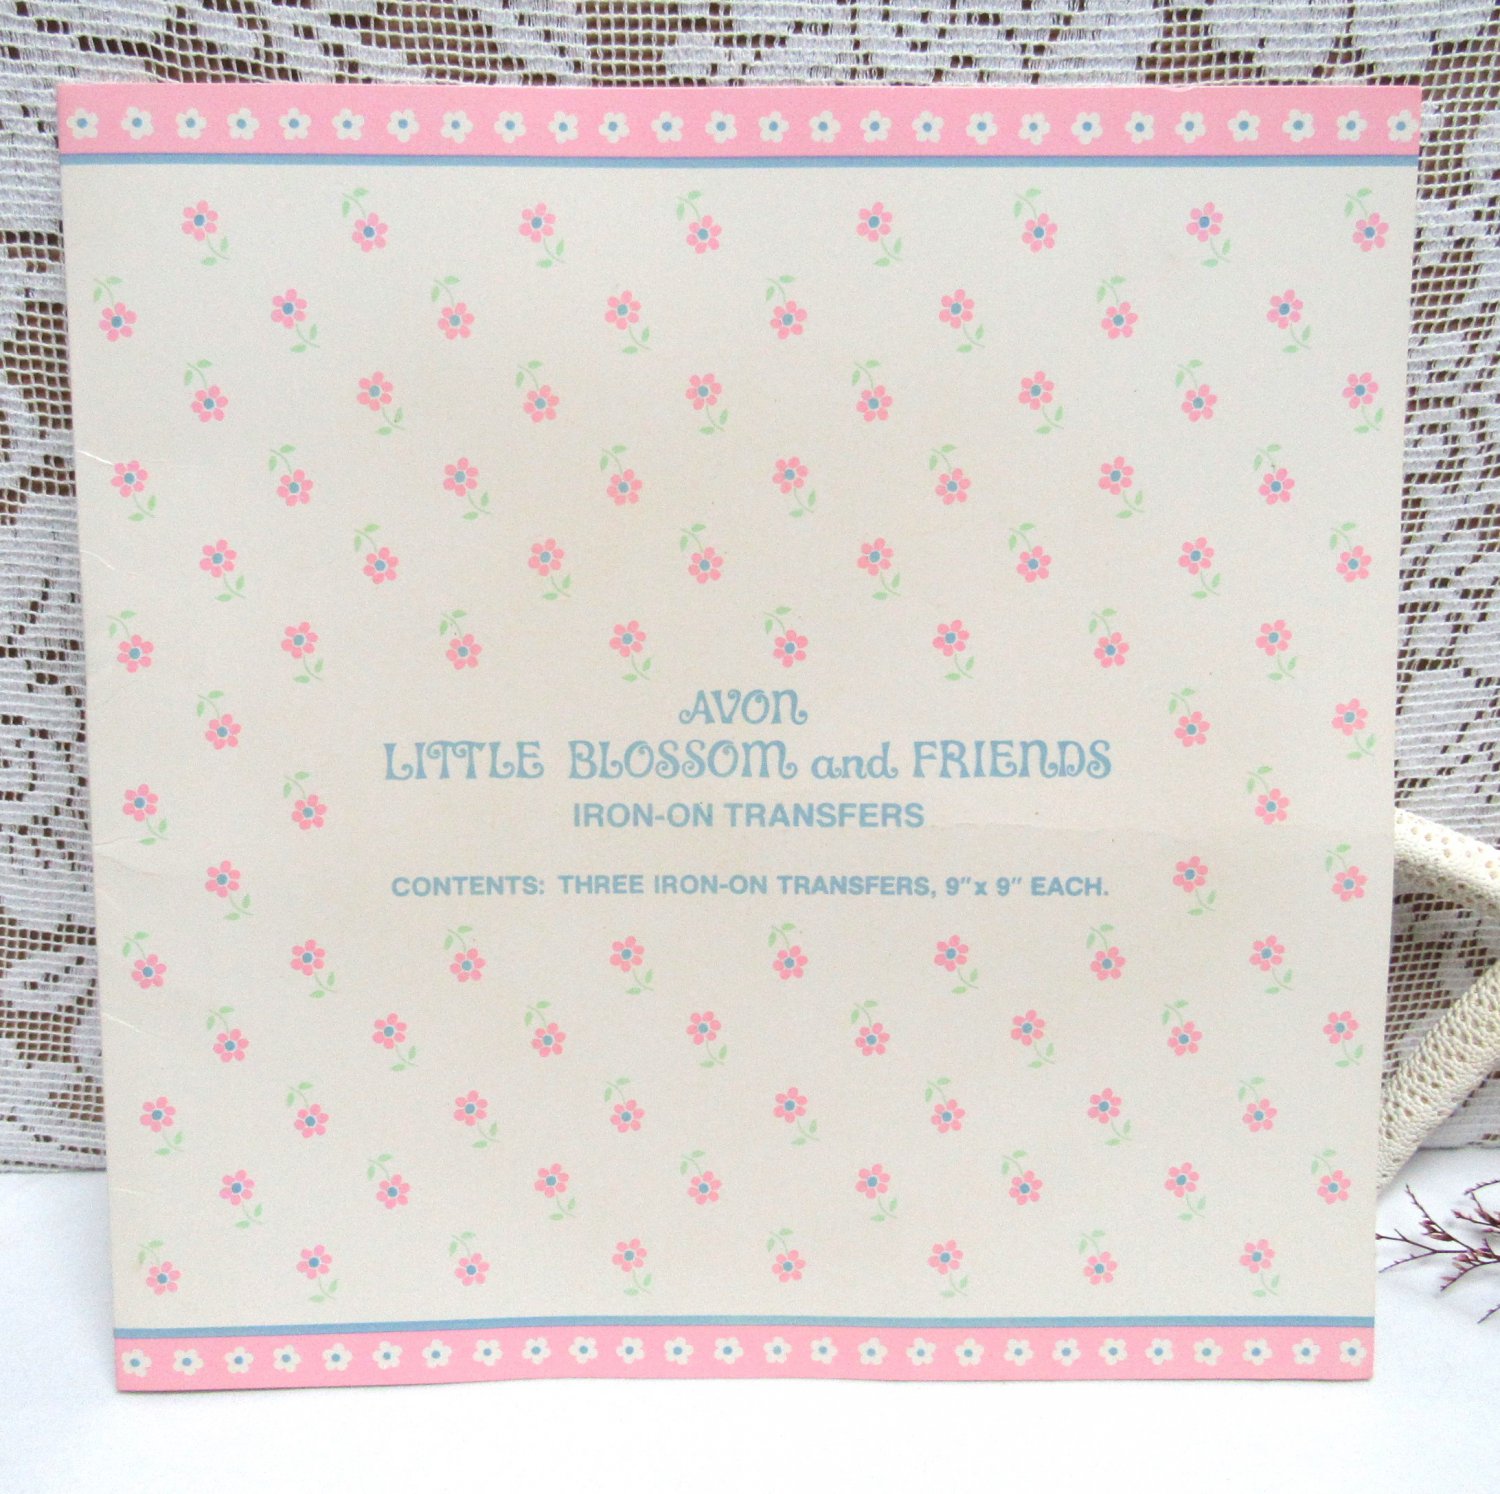 Iron-On Transfers Avon Little Blossom and Friends Vintage Fabric Desig